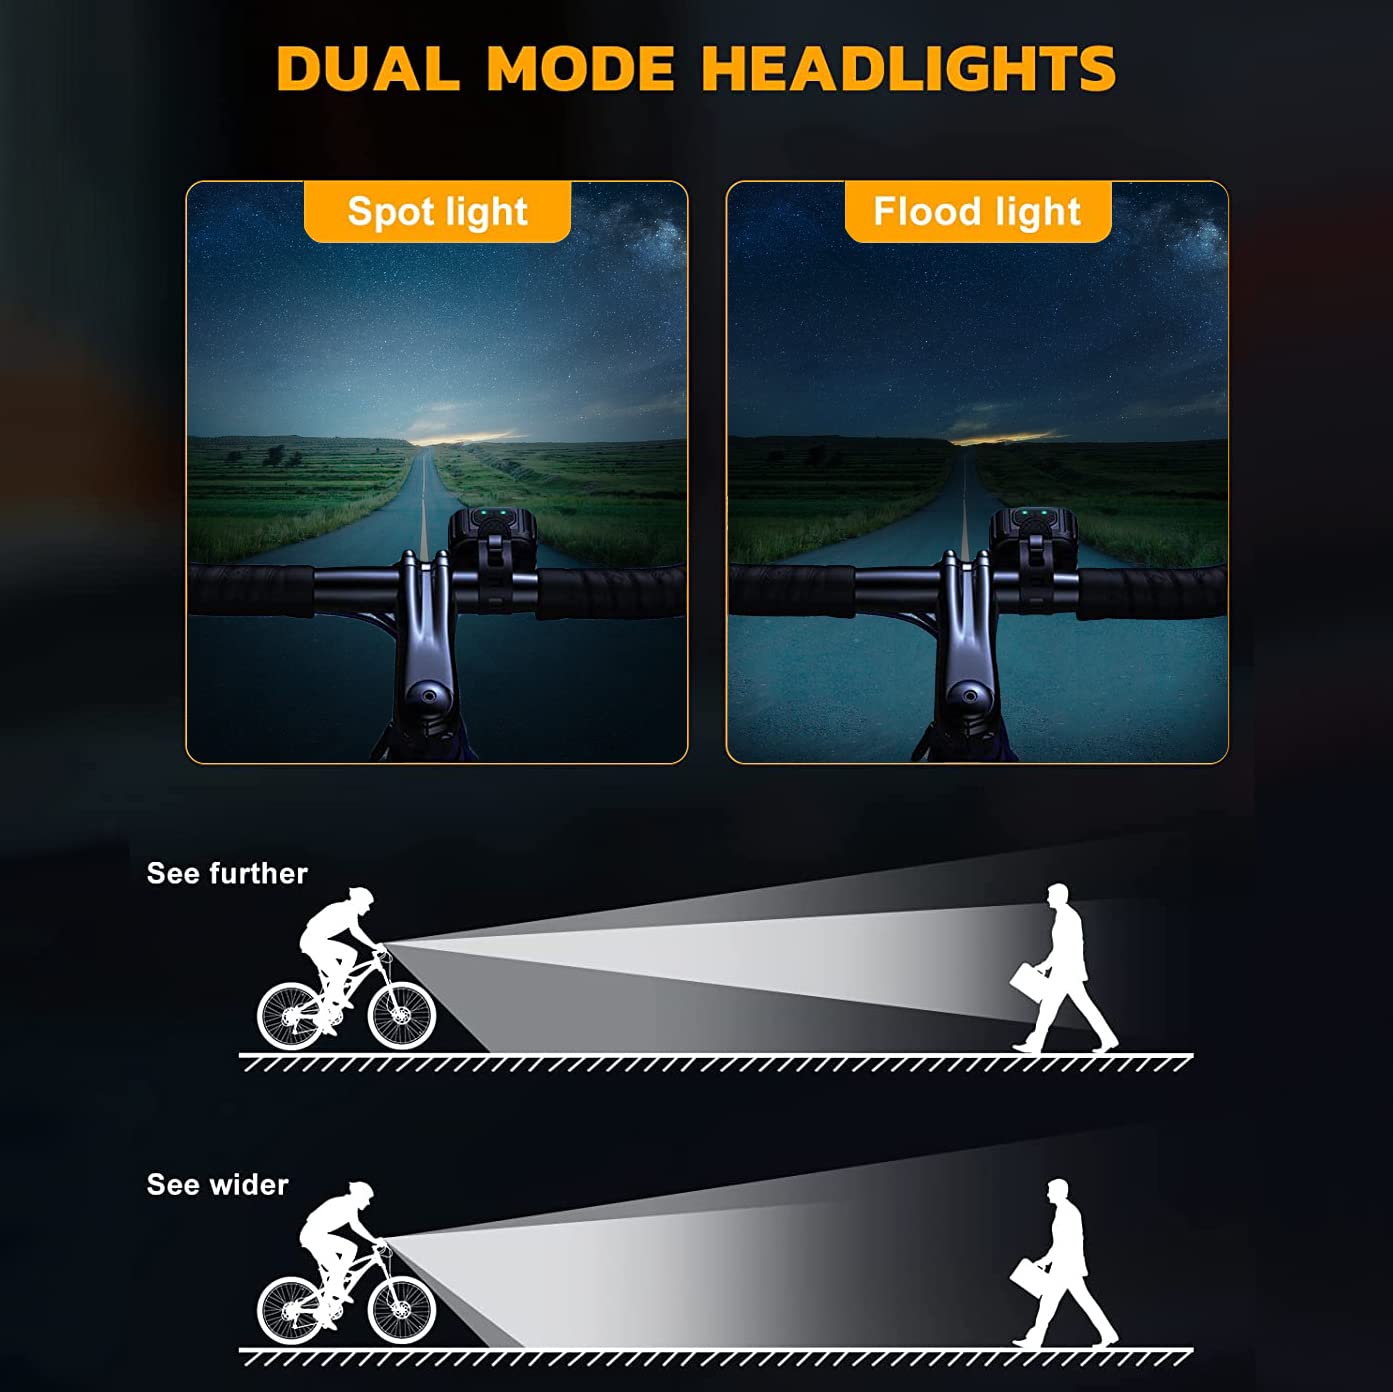 Bike Lights Set Ultra Bright, Bicycle Light Rechargeable with 6 Spot & Flood Beams, IP65 Waterproof Bike Lights for Night Riding, DIY 4X4 + 6X6 Lightning Modes Bike Headlight and Tail Light